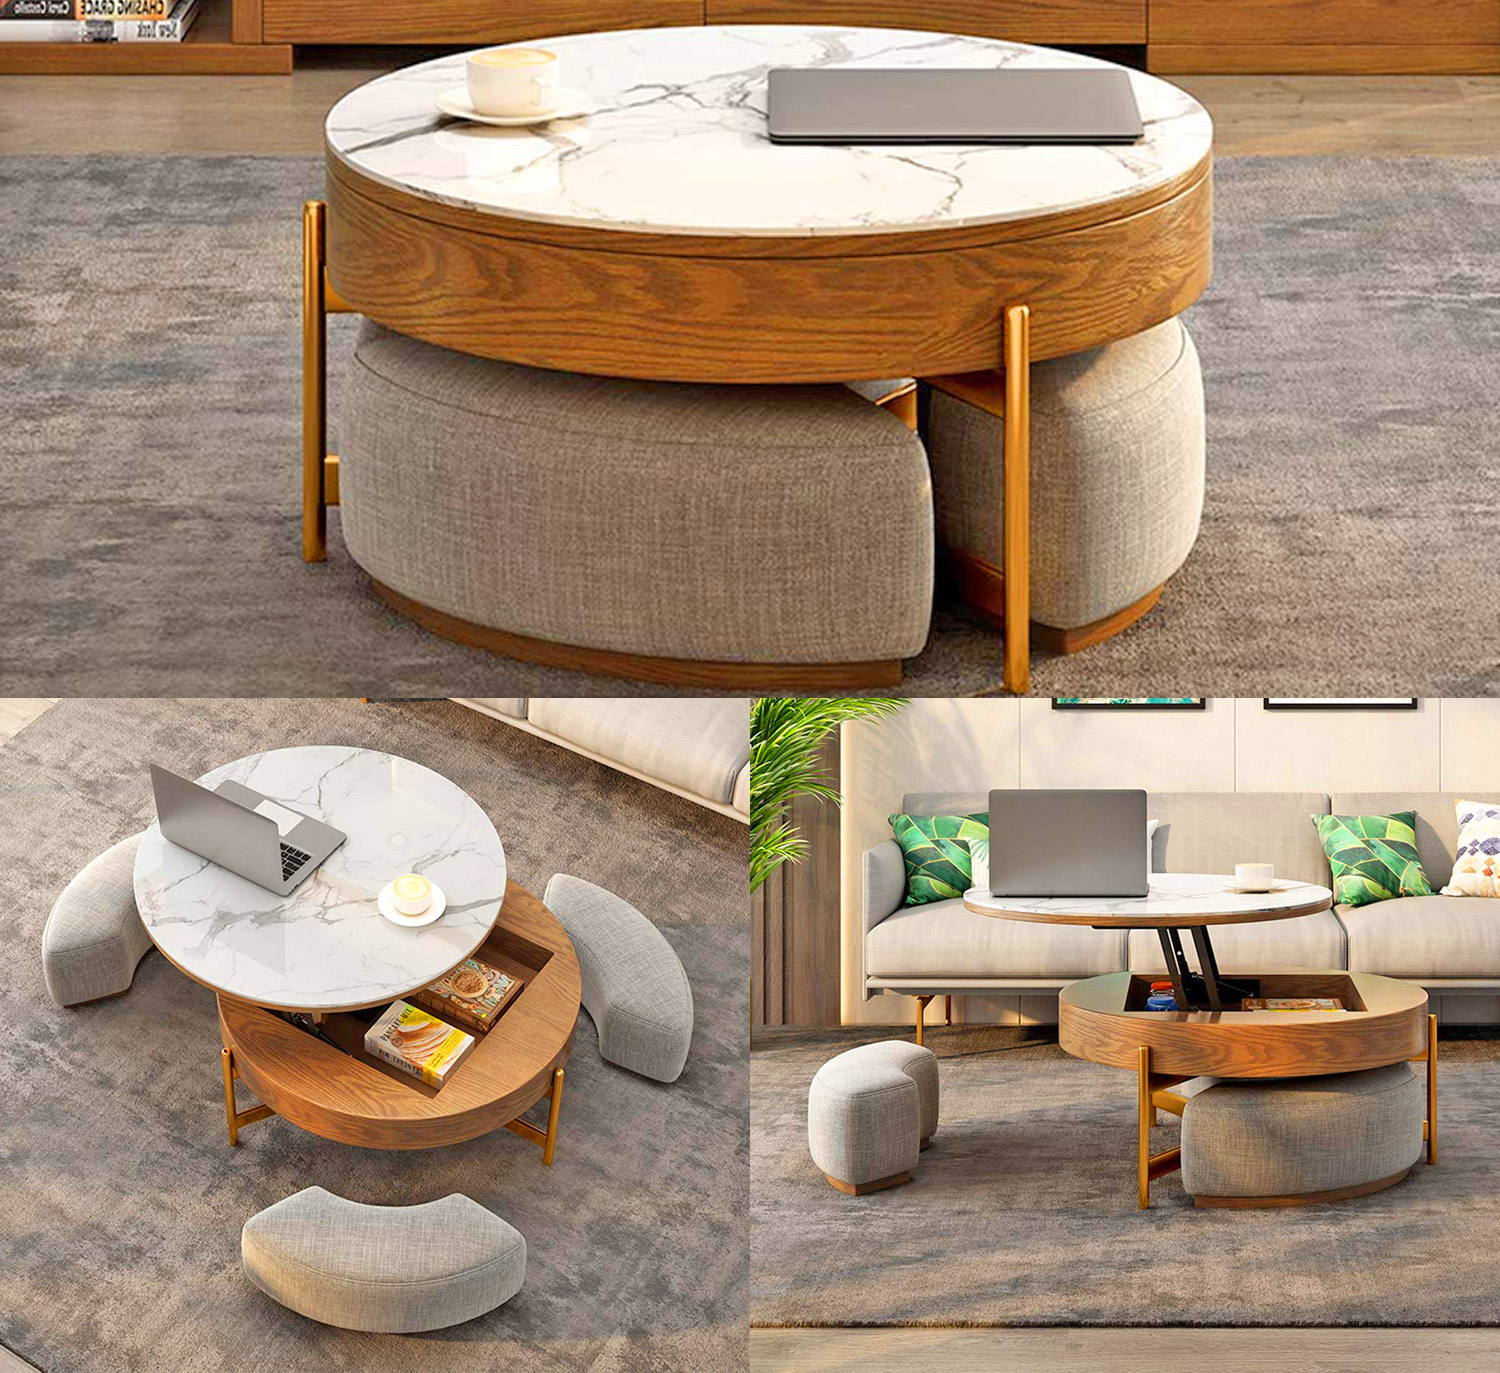 This Amazing Rising Coffee Table Has 3 Integrated Ottomans That Hide Underneath It 0 